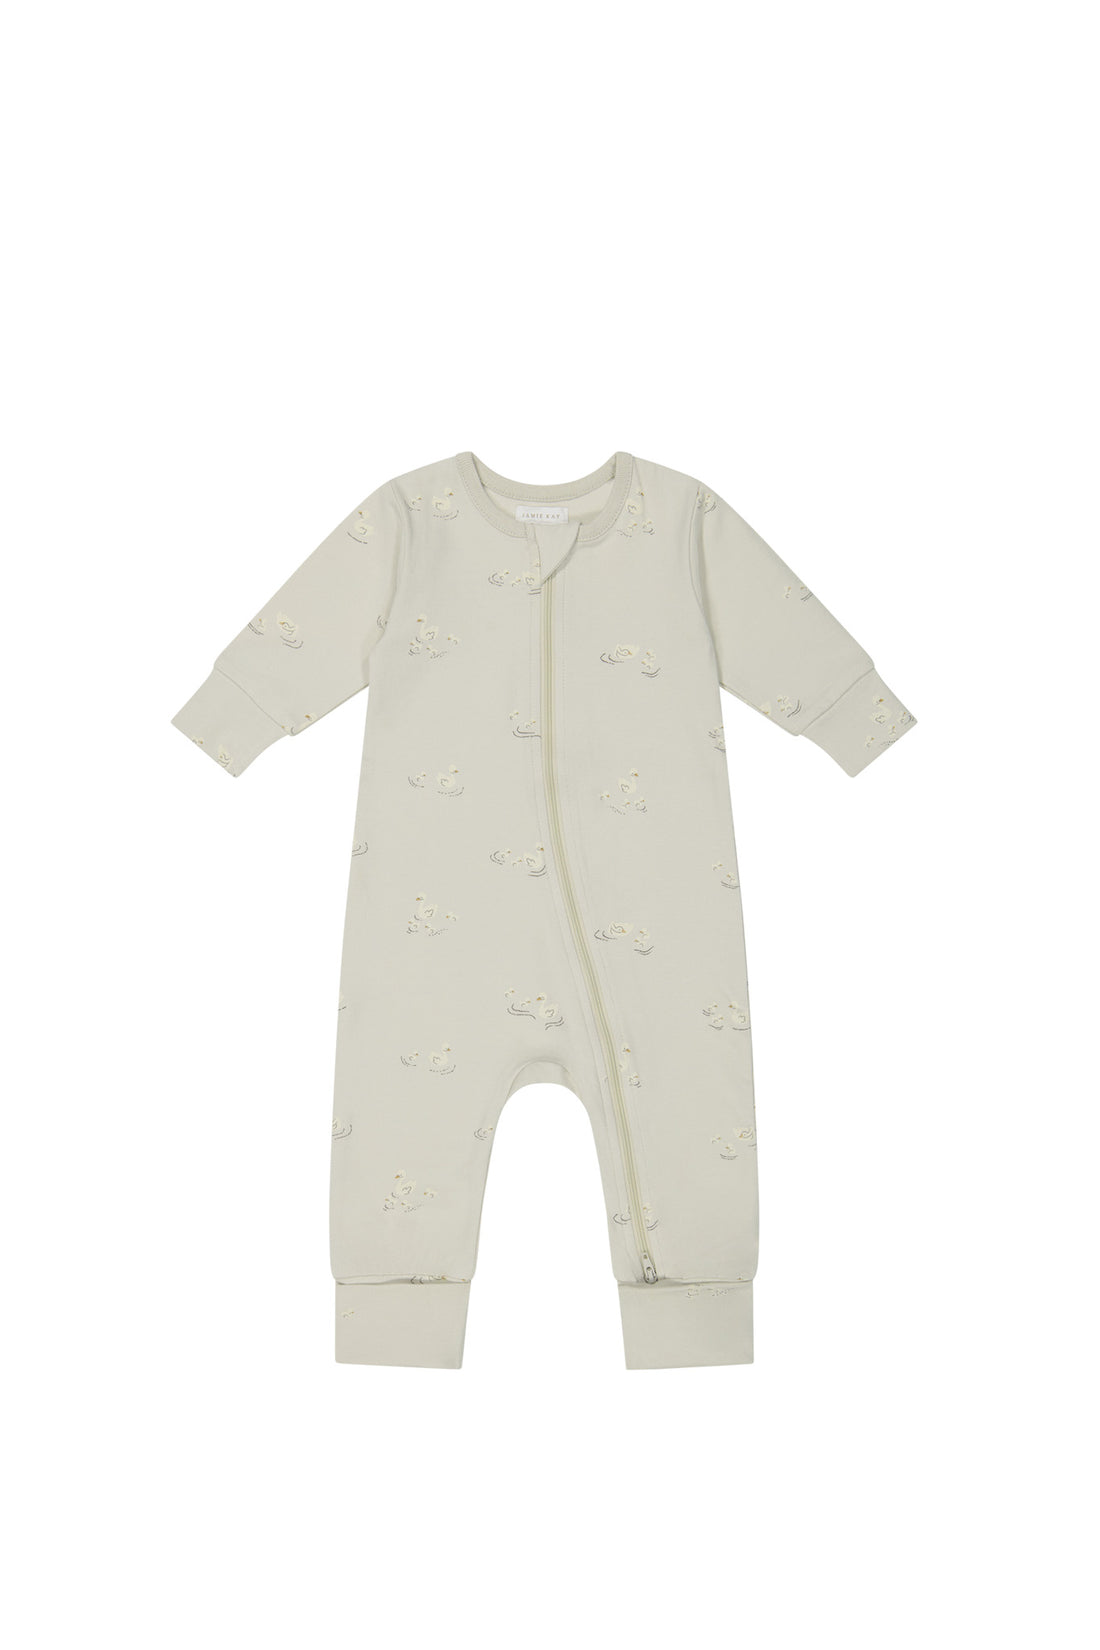 Organic Cotton Gracelyn Onepiece - Ducks In A Row Seed Silver Lining Childrens Onepiece from Jamie Kay NZ